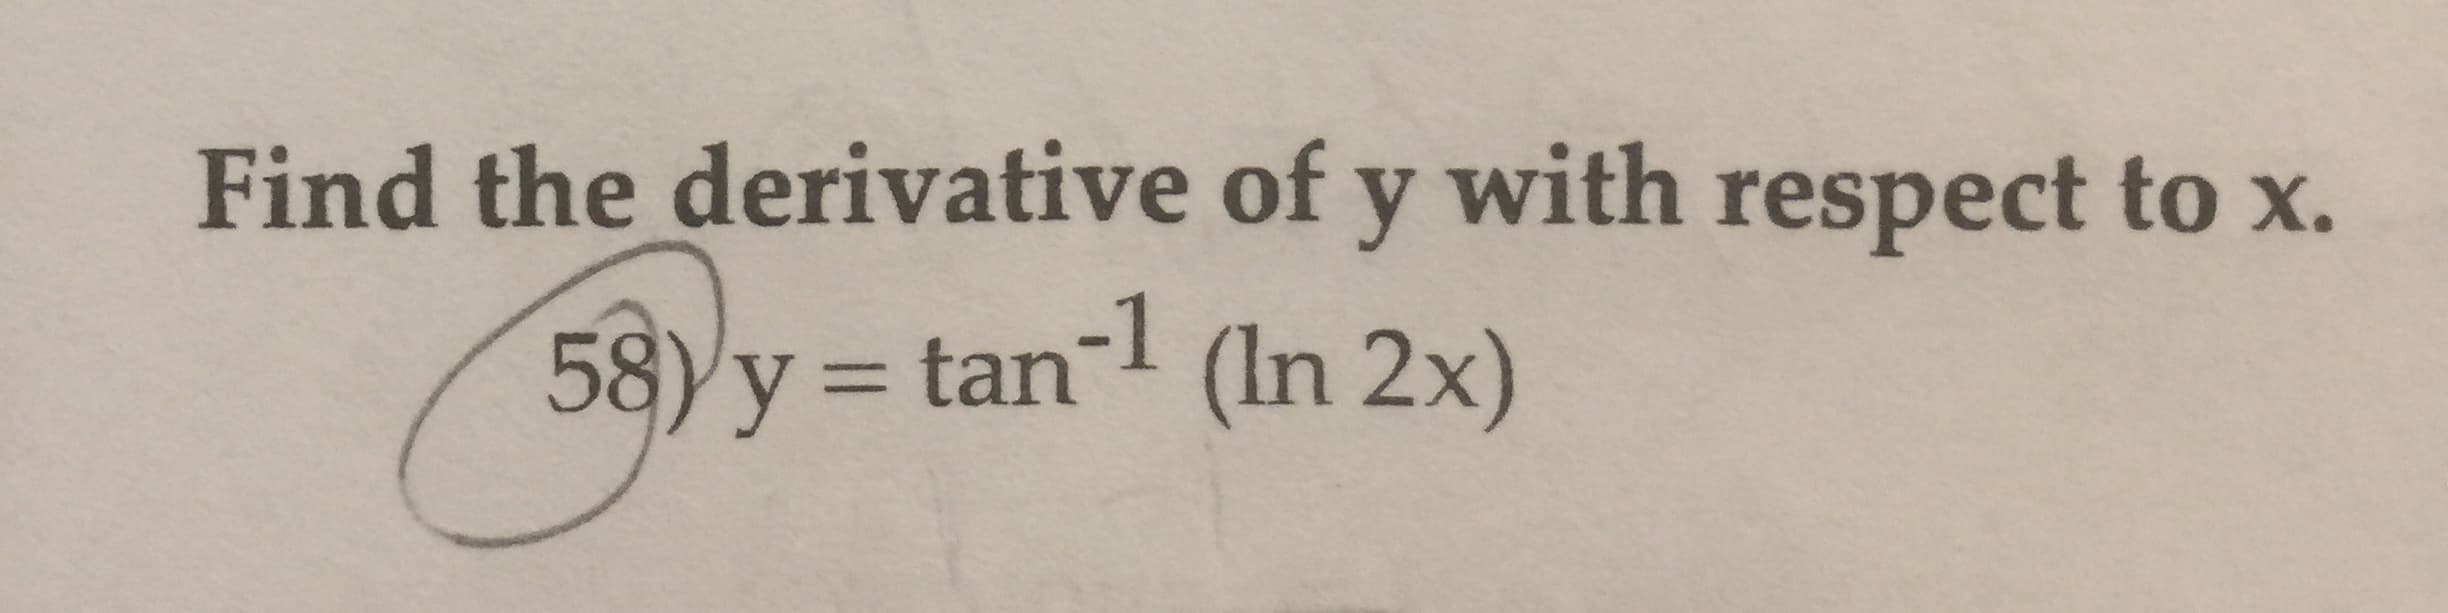 Find the derivative of y with respect to x.
58)y tan (In 2x)
